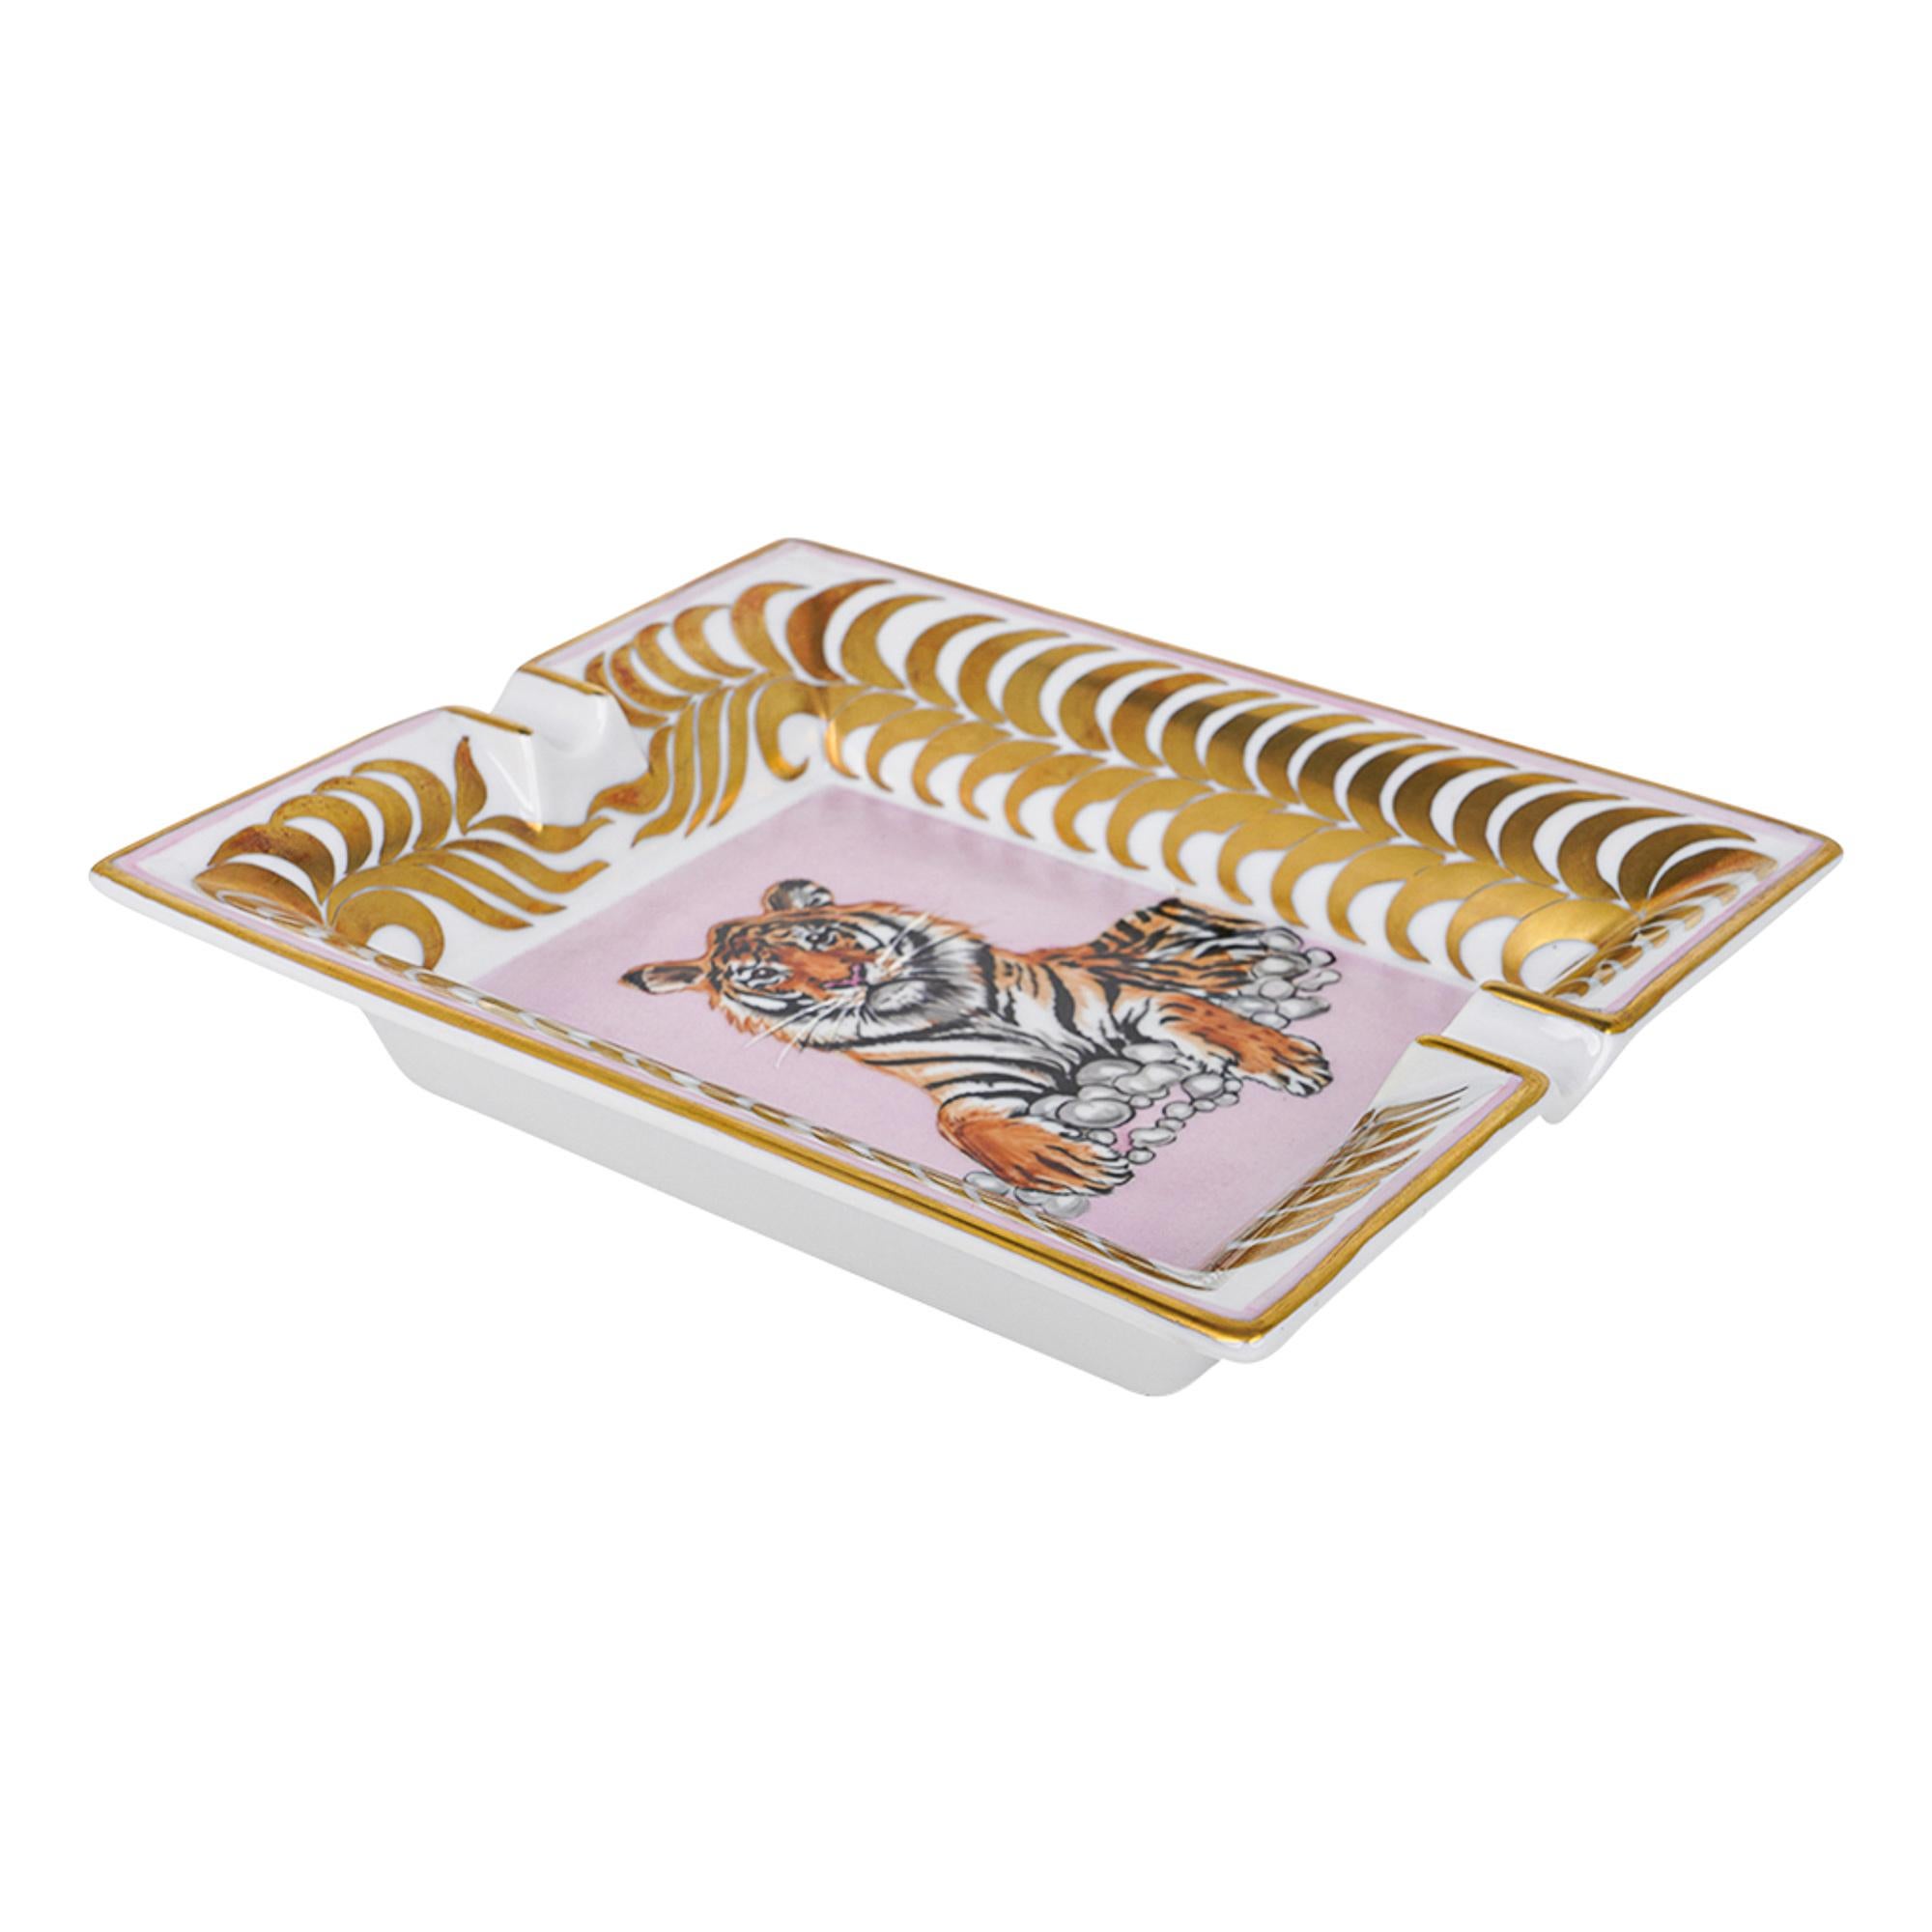 Women's or Men's Hermes Change Tray Tigre Royal Or / Rose Hand Painted New w/ Box For Sale